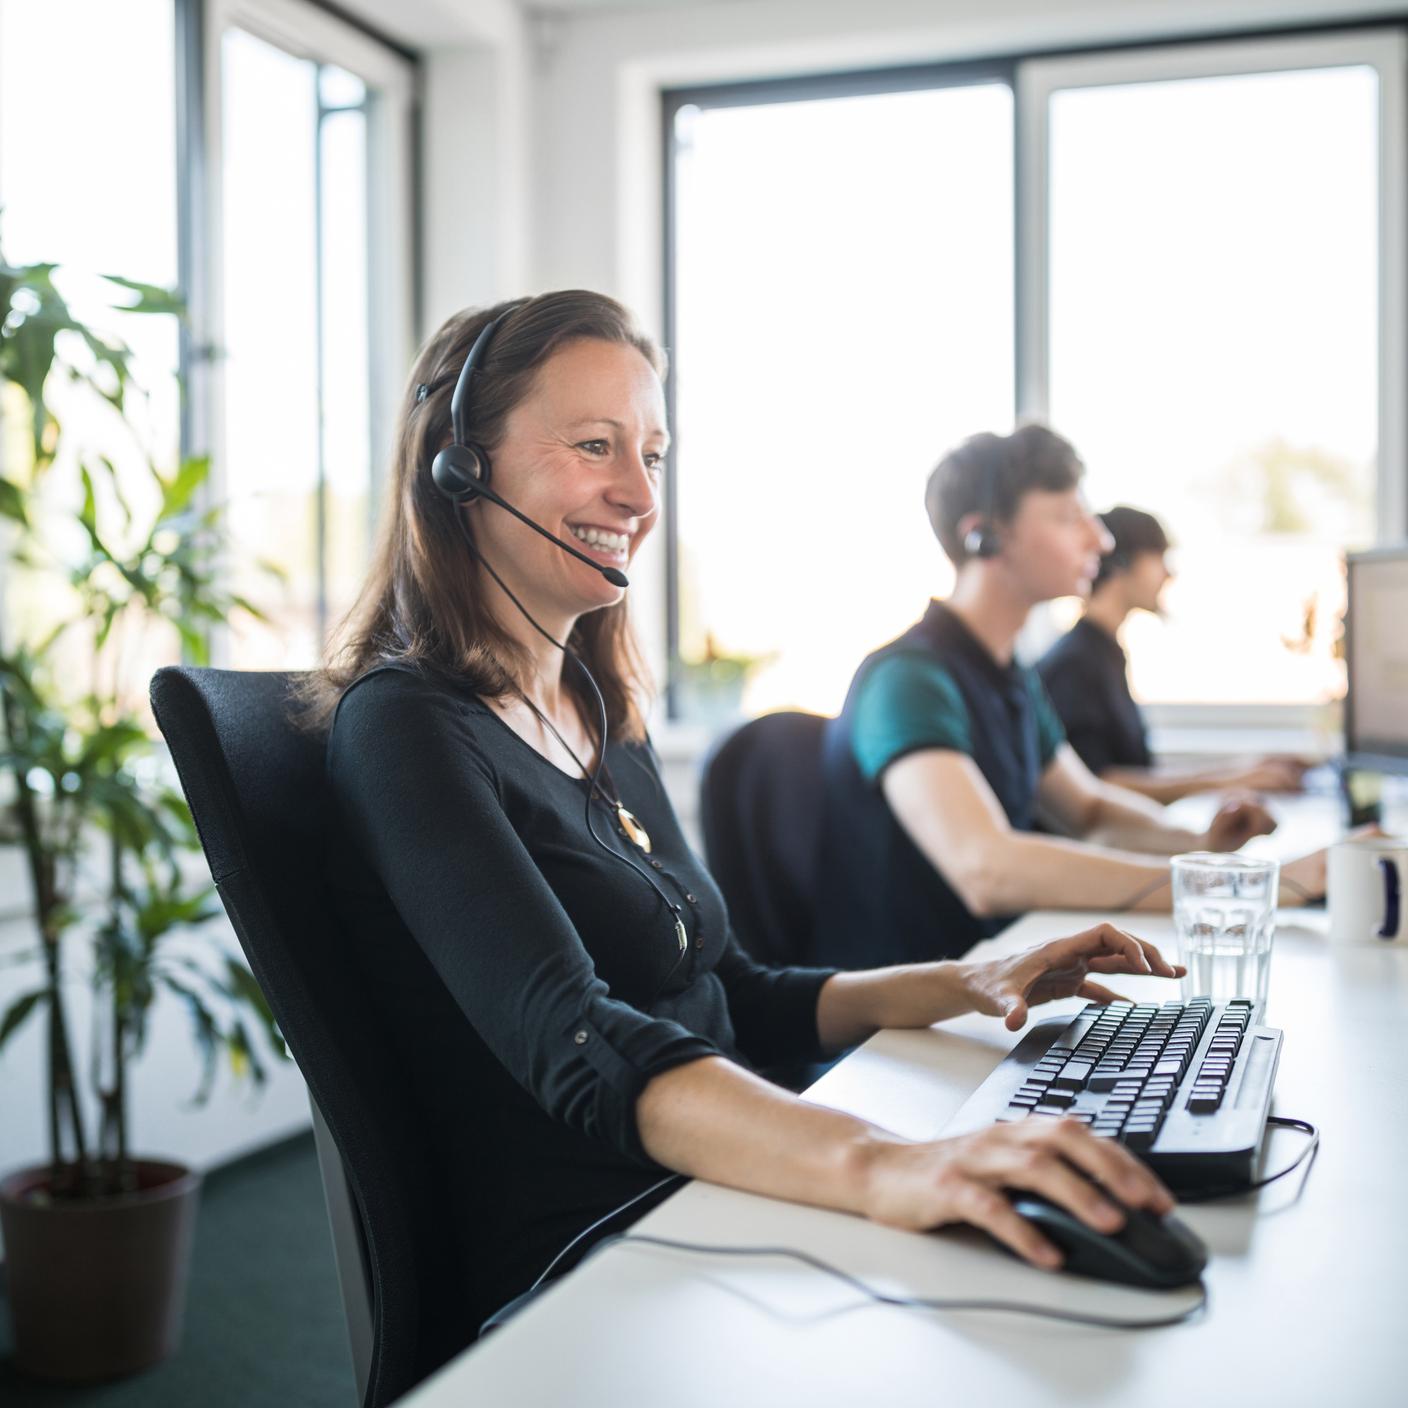 Smiling female customer service representative wearing headset using computer at desk in office